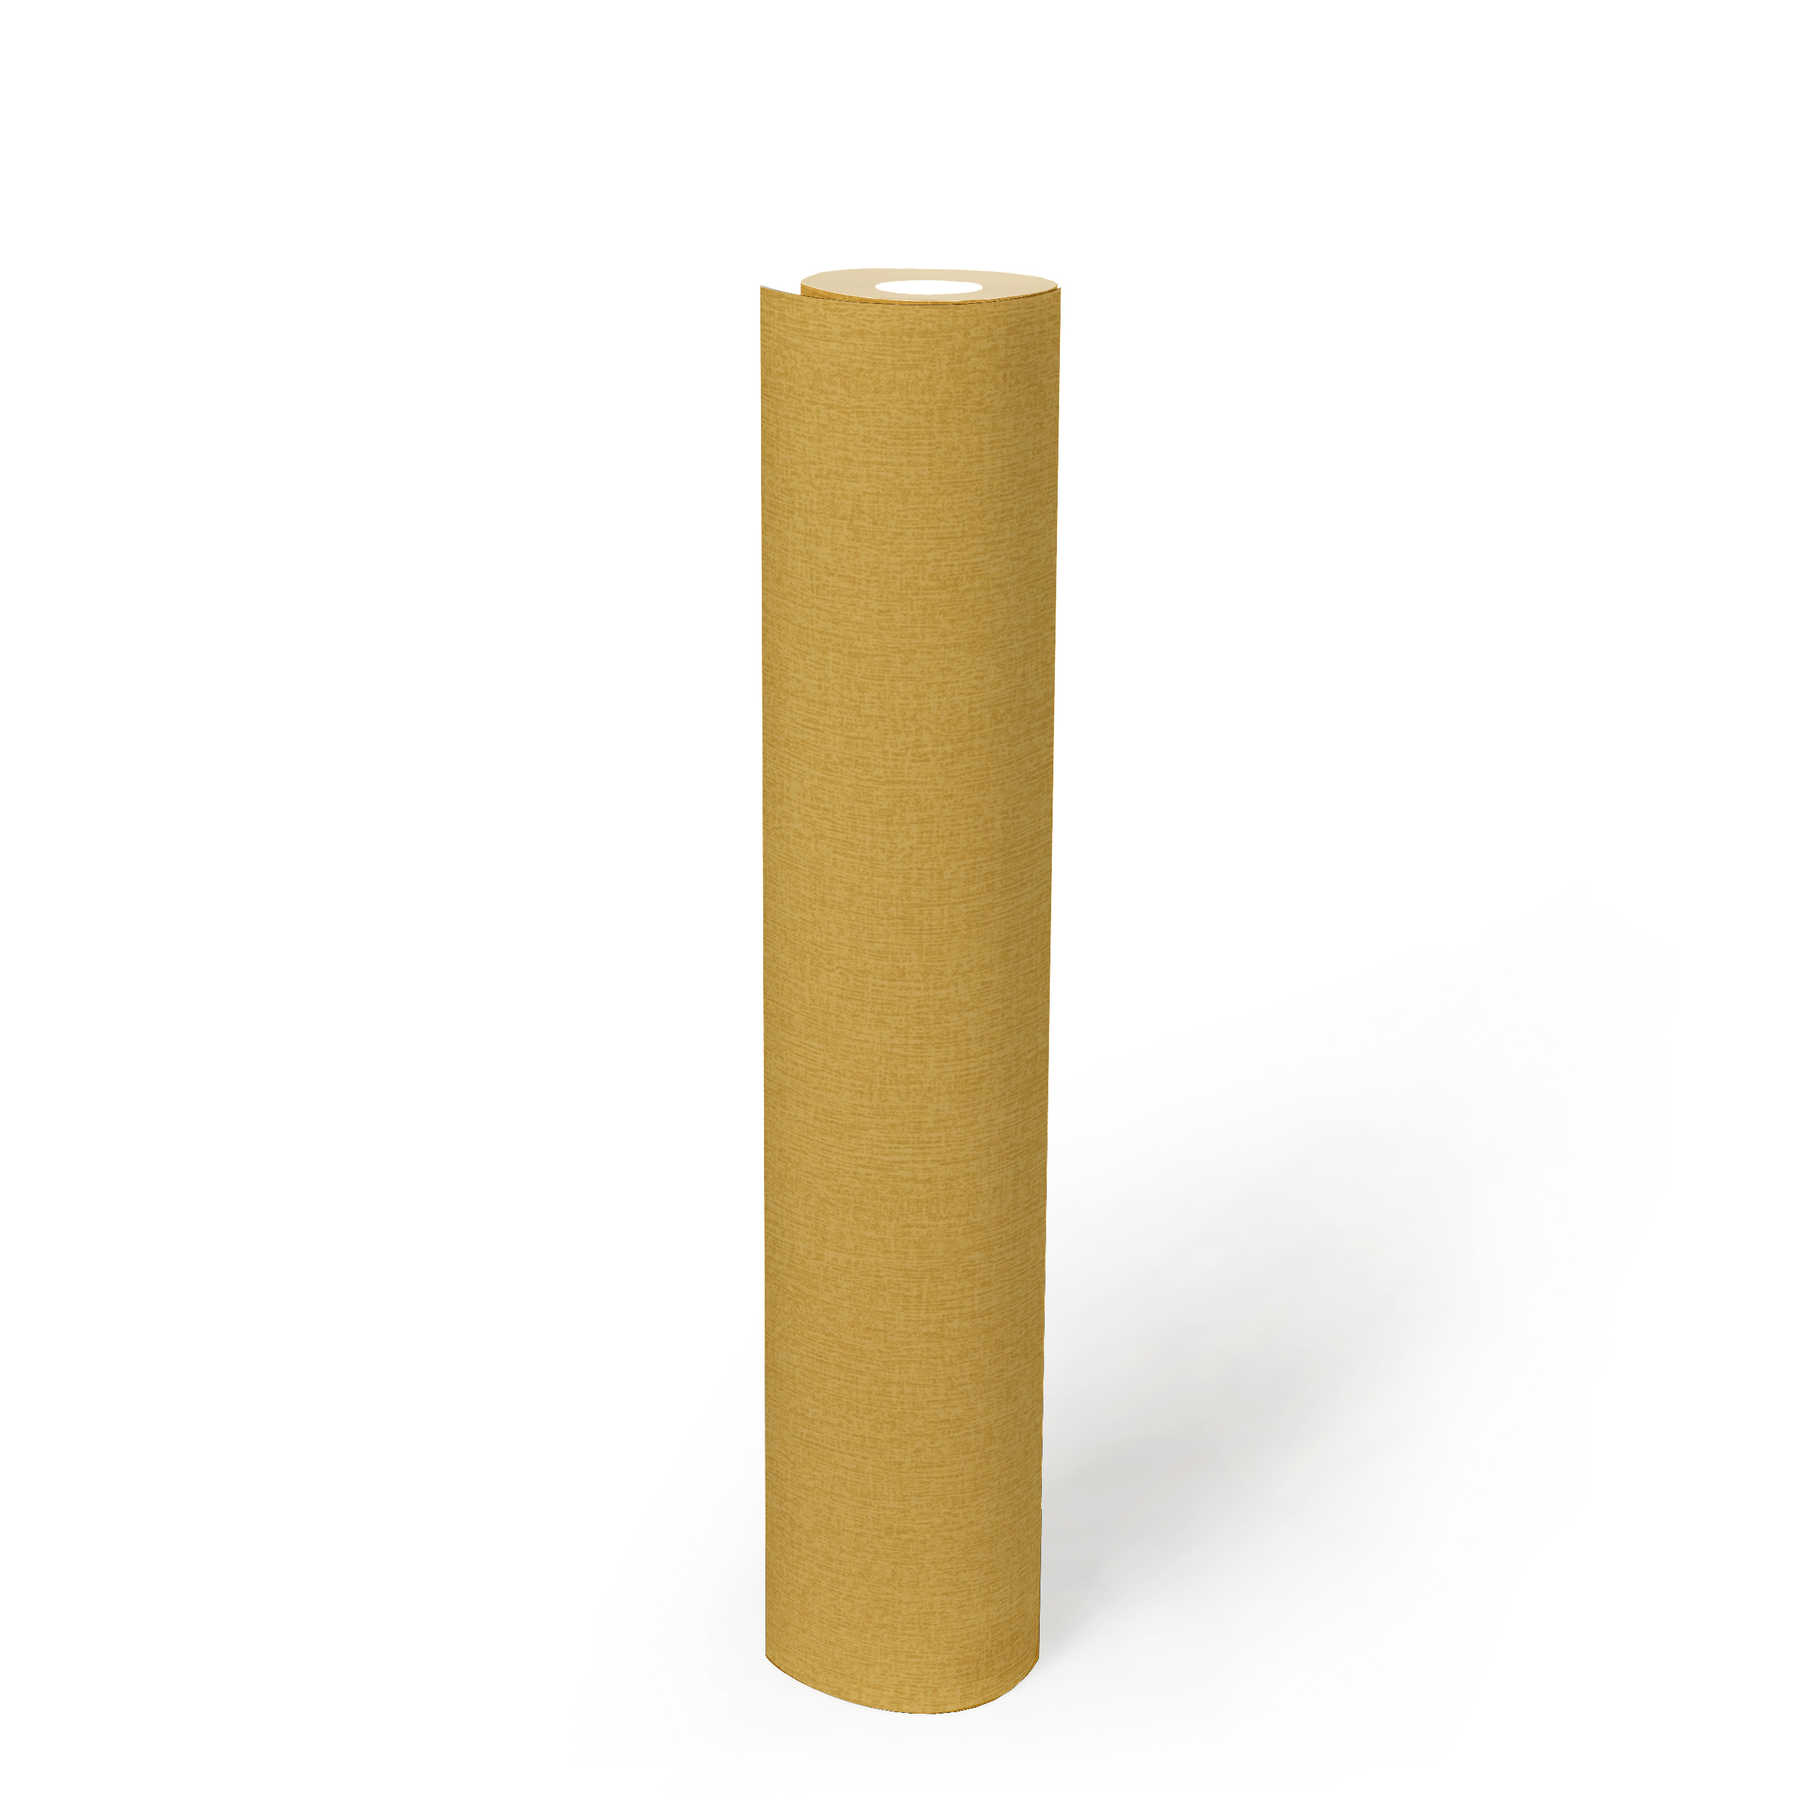             Plain wallpaper with textile look, colour mottled - yellow
        